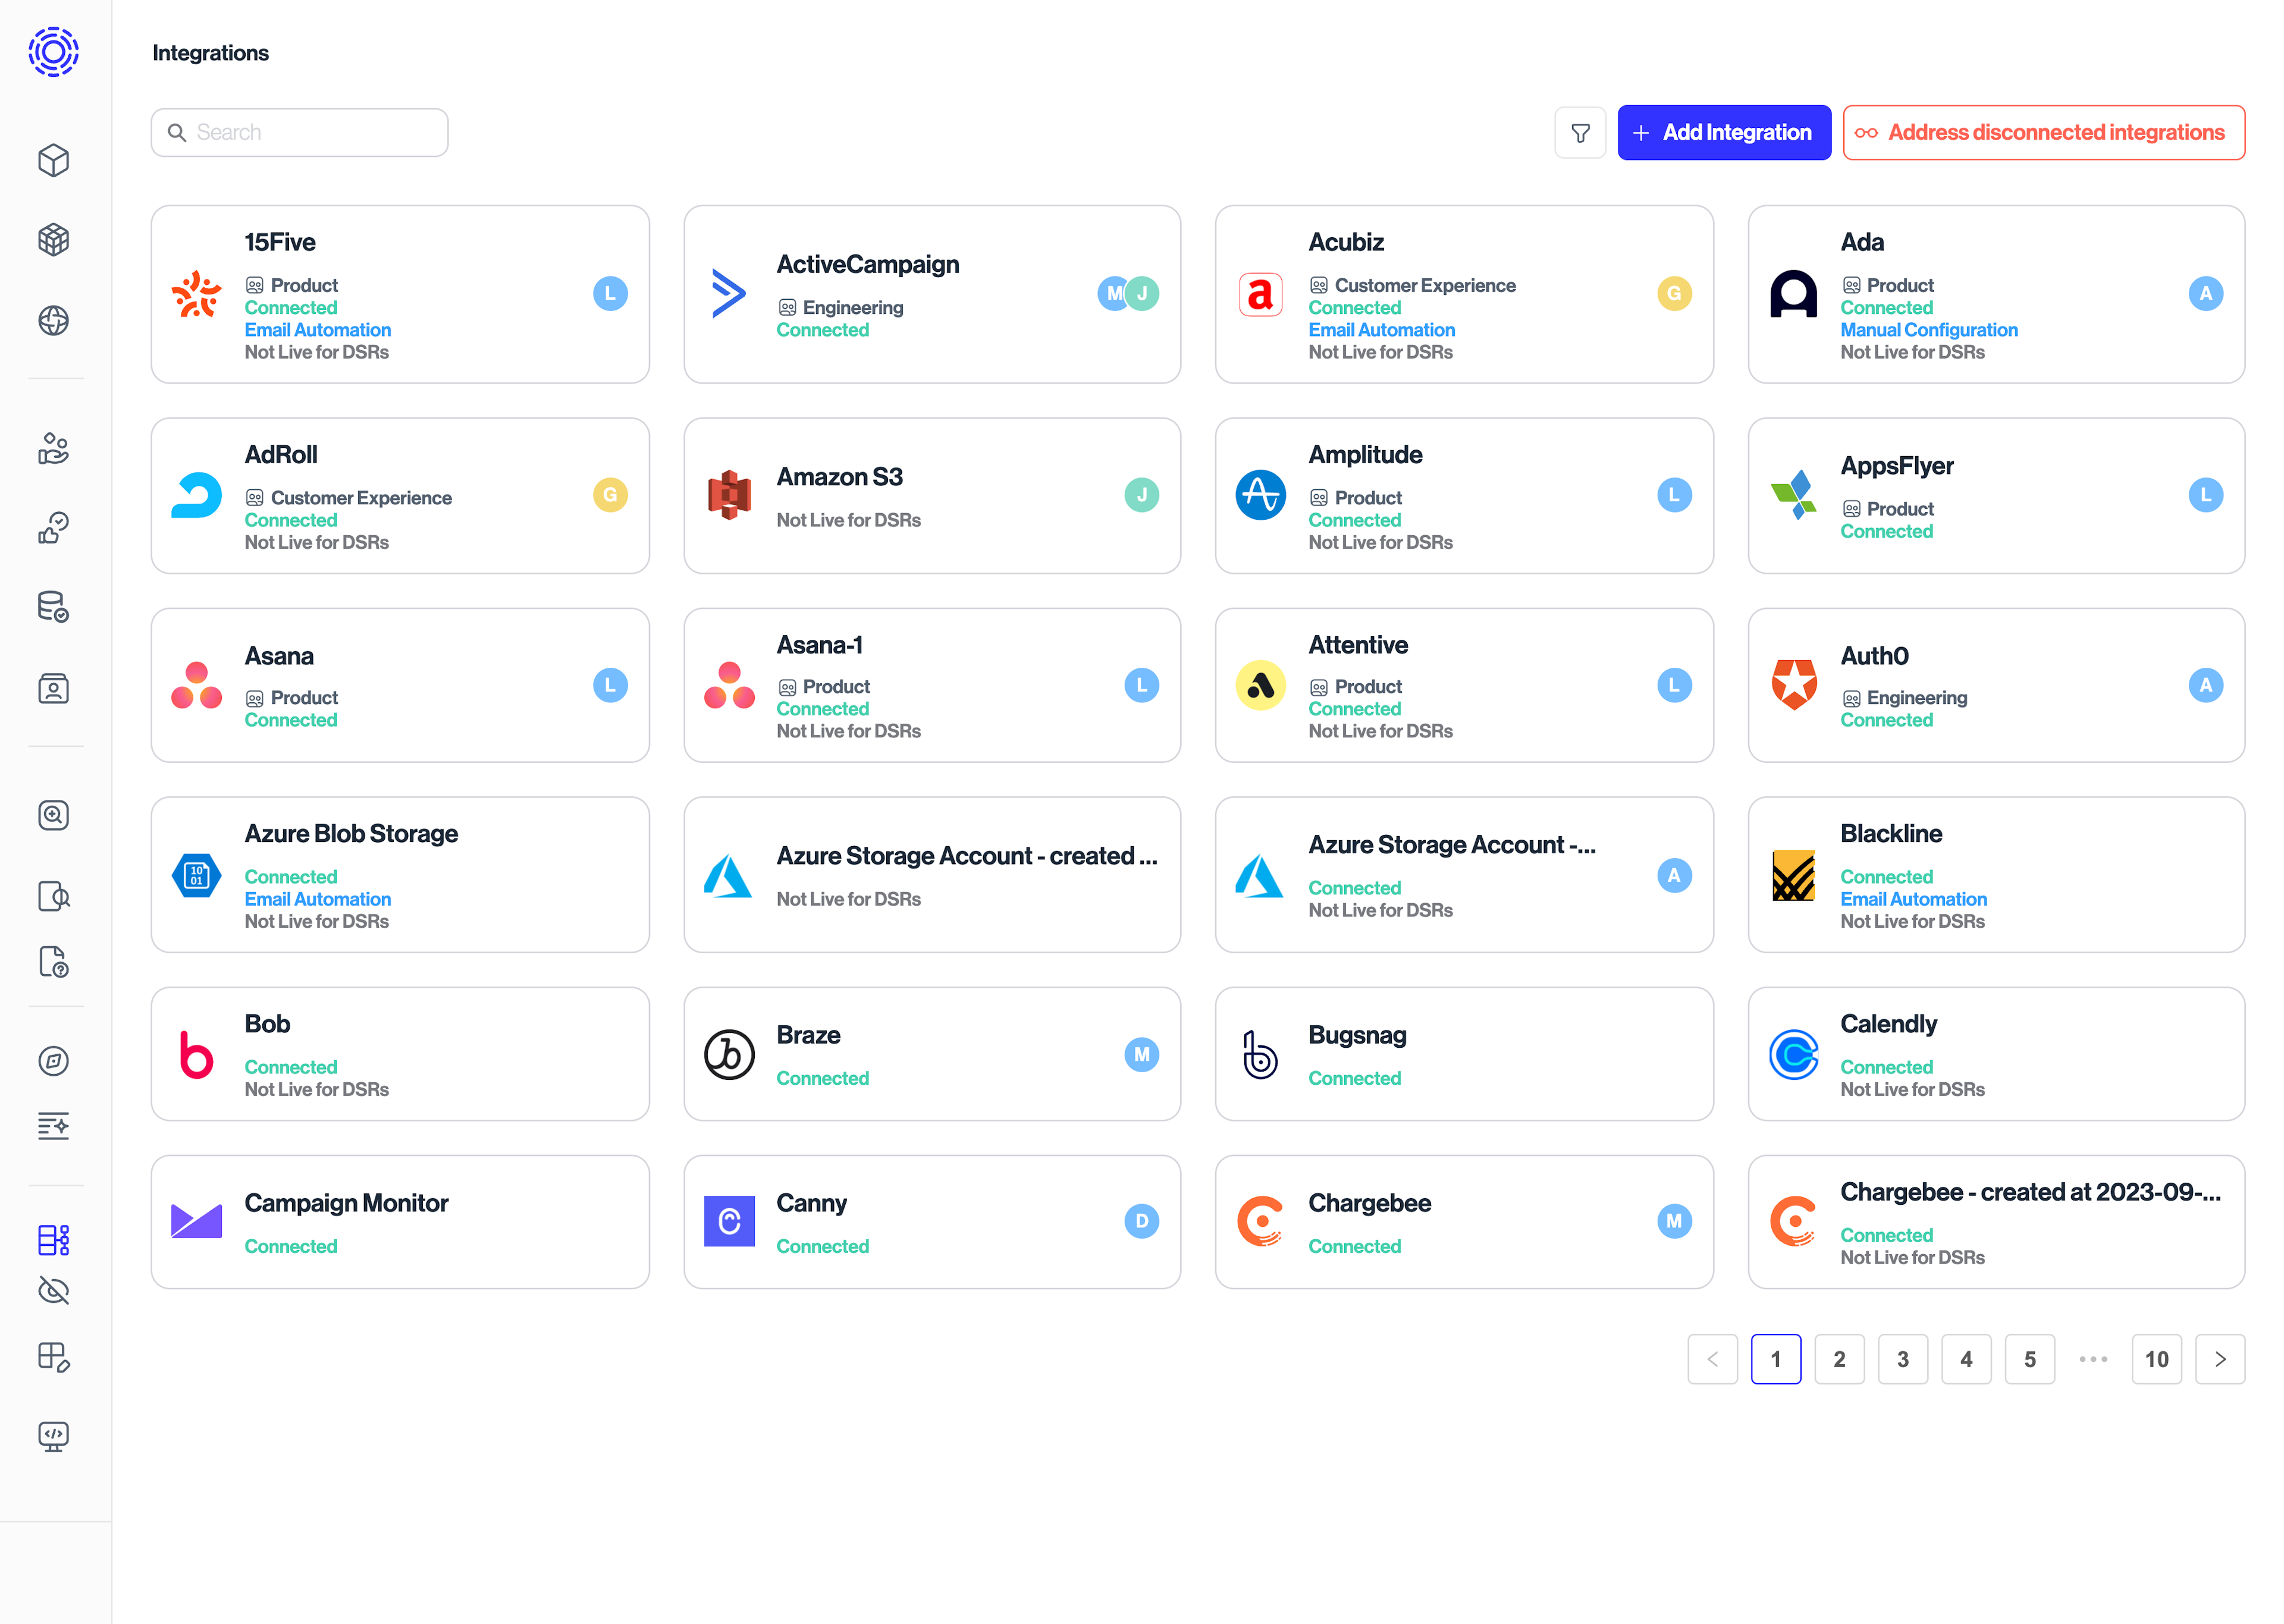 The Integrations page of the Admin Dashboard